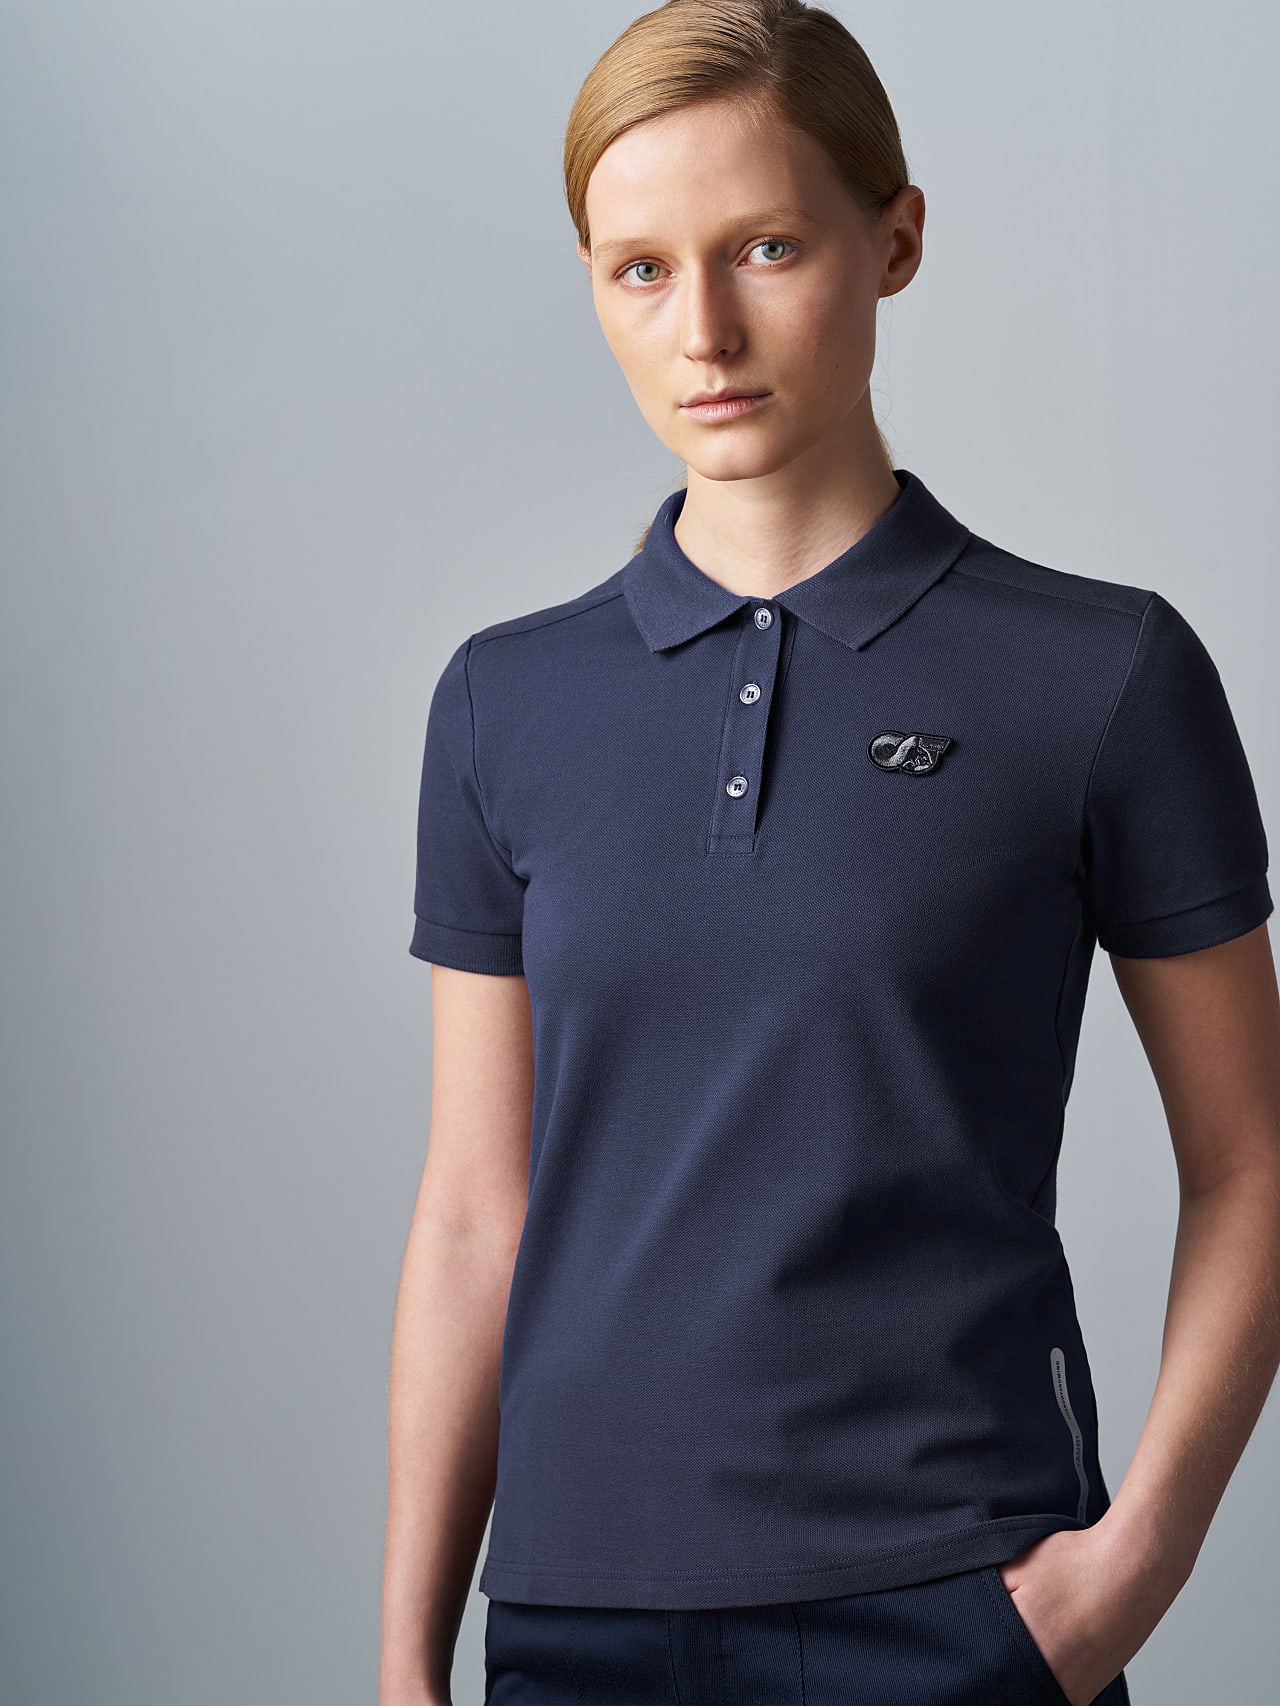 AlphaTauri | JANEY V1.Y5.02 | Pique Polo Shirt in navy for Women